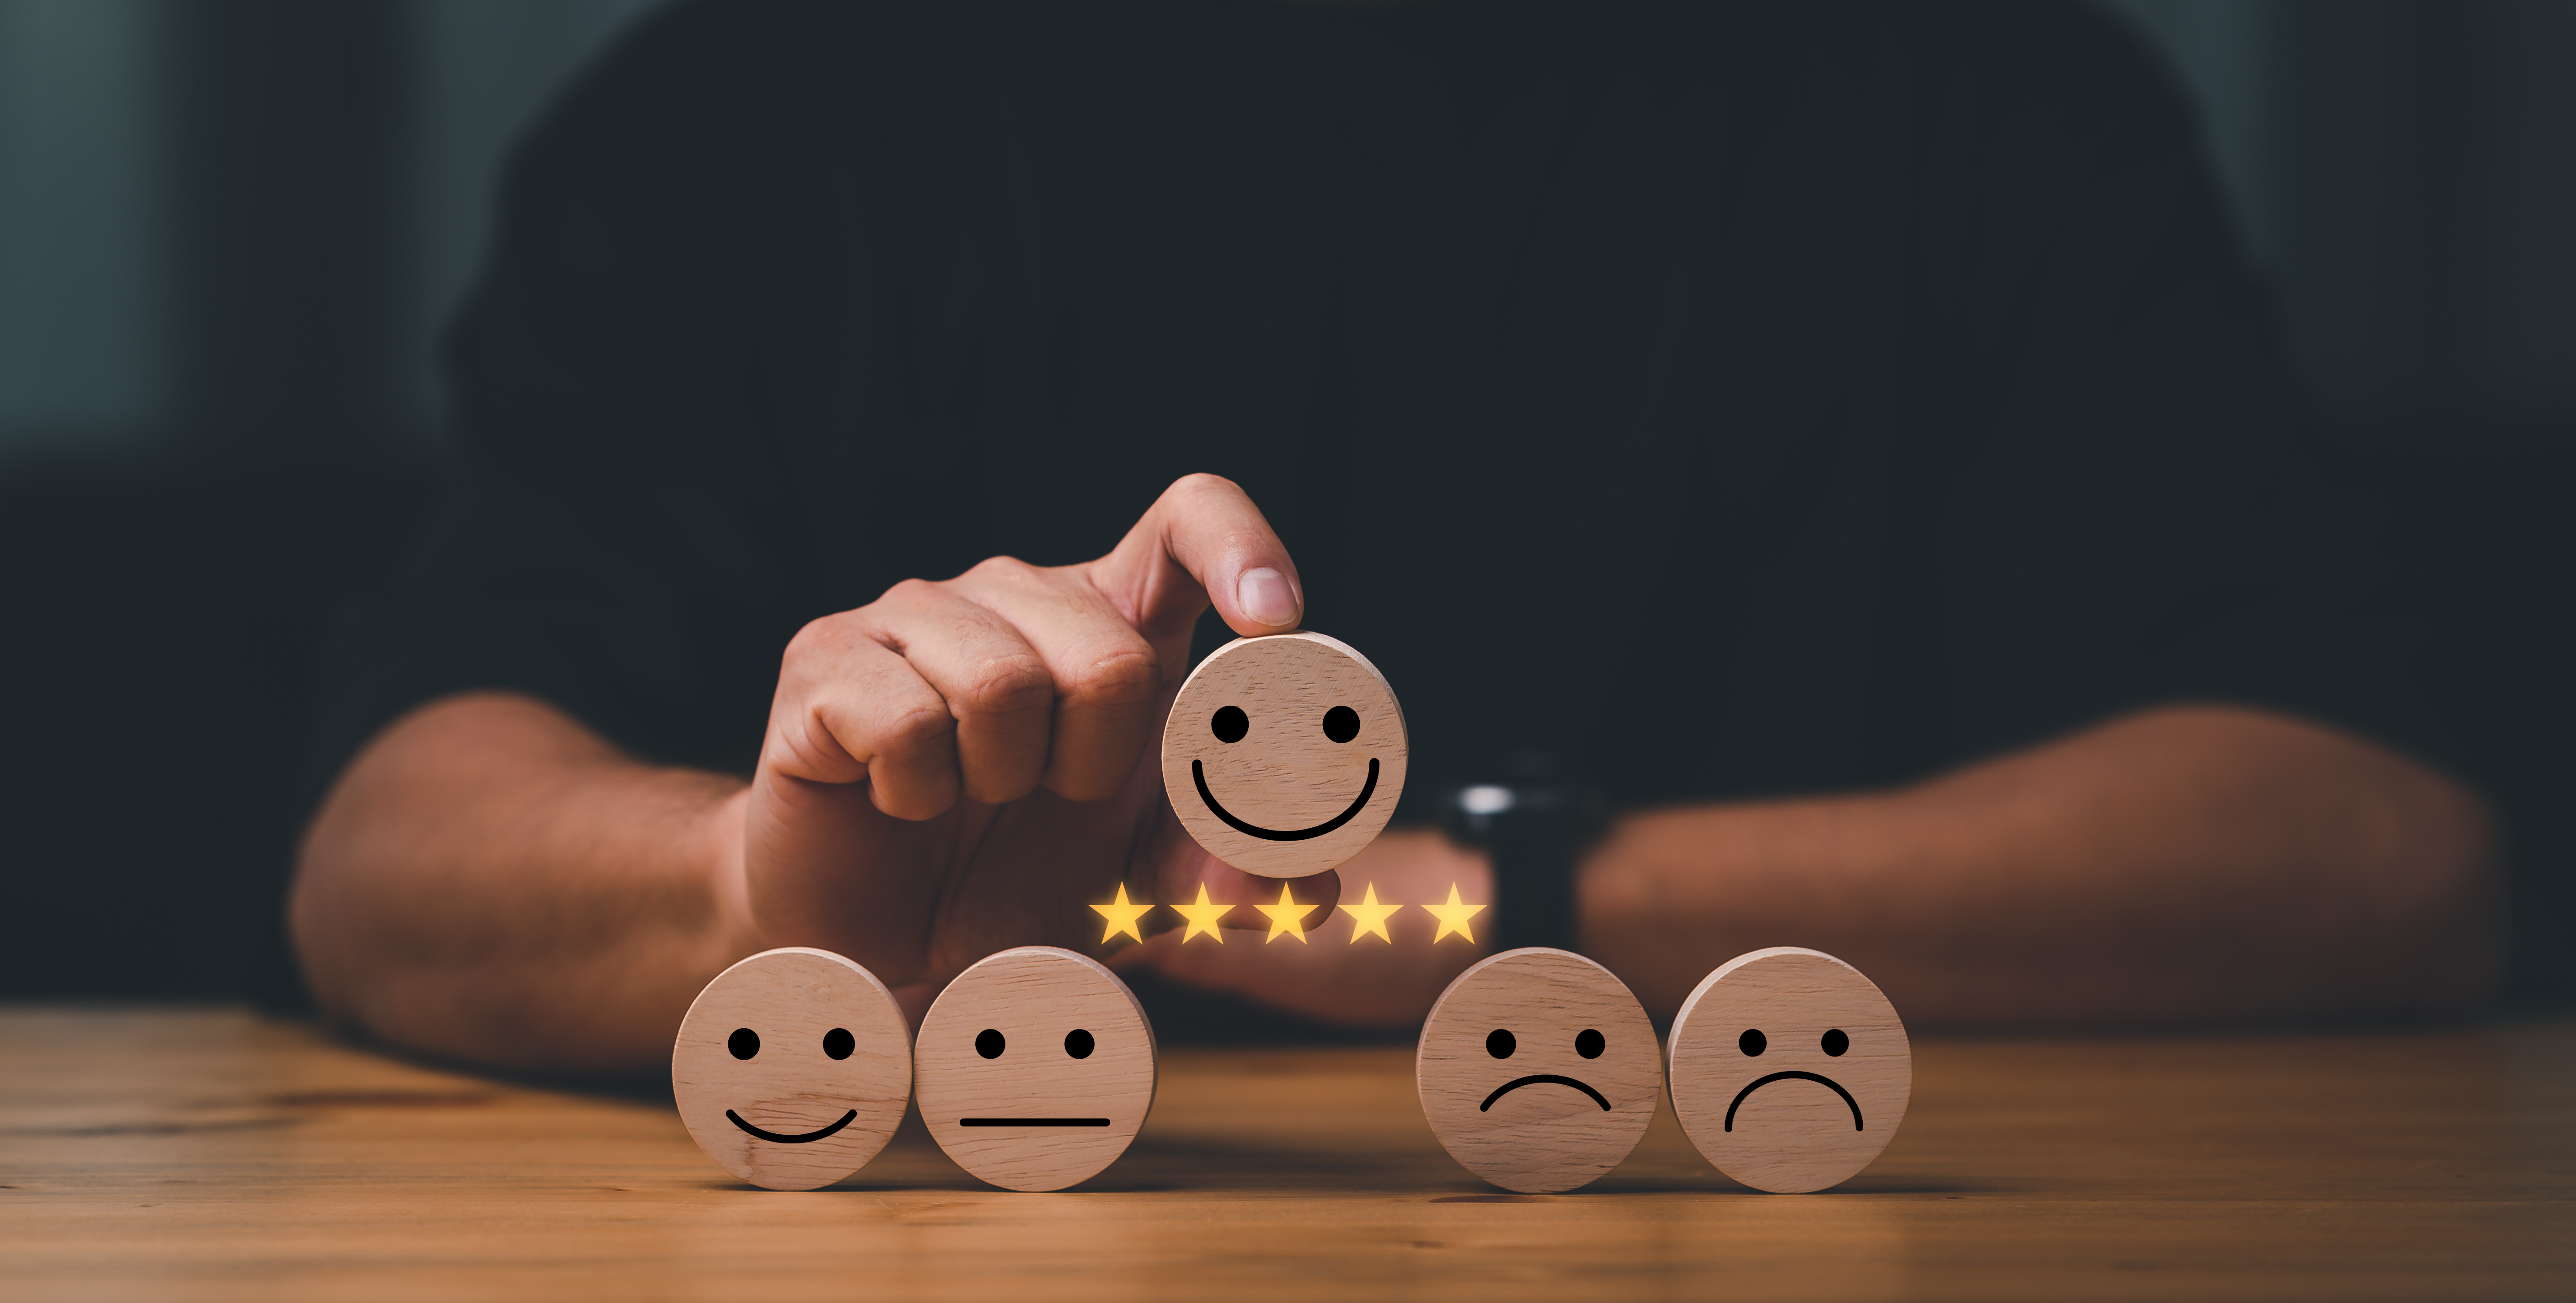 An image showcasing five smileys and five stars. A person is lifting up a smiling smiley in the middle. The smiling smiley represents a happy customer and the five stars represent the NPS score.